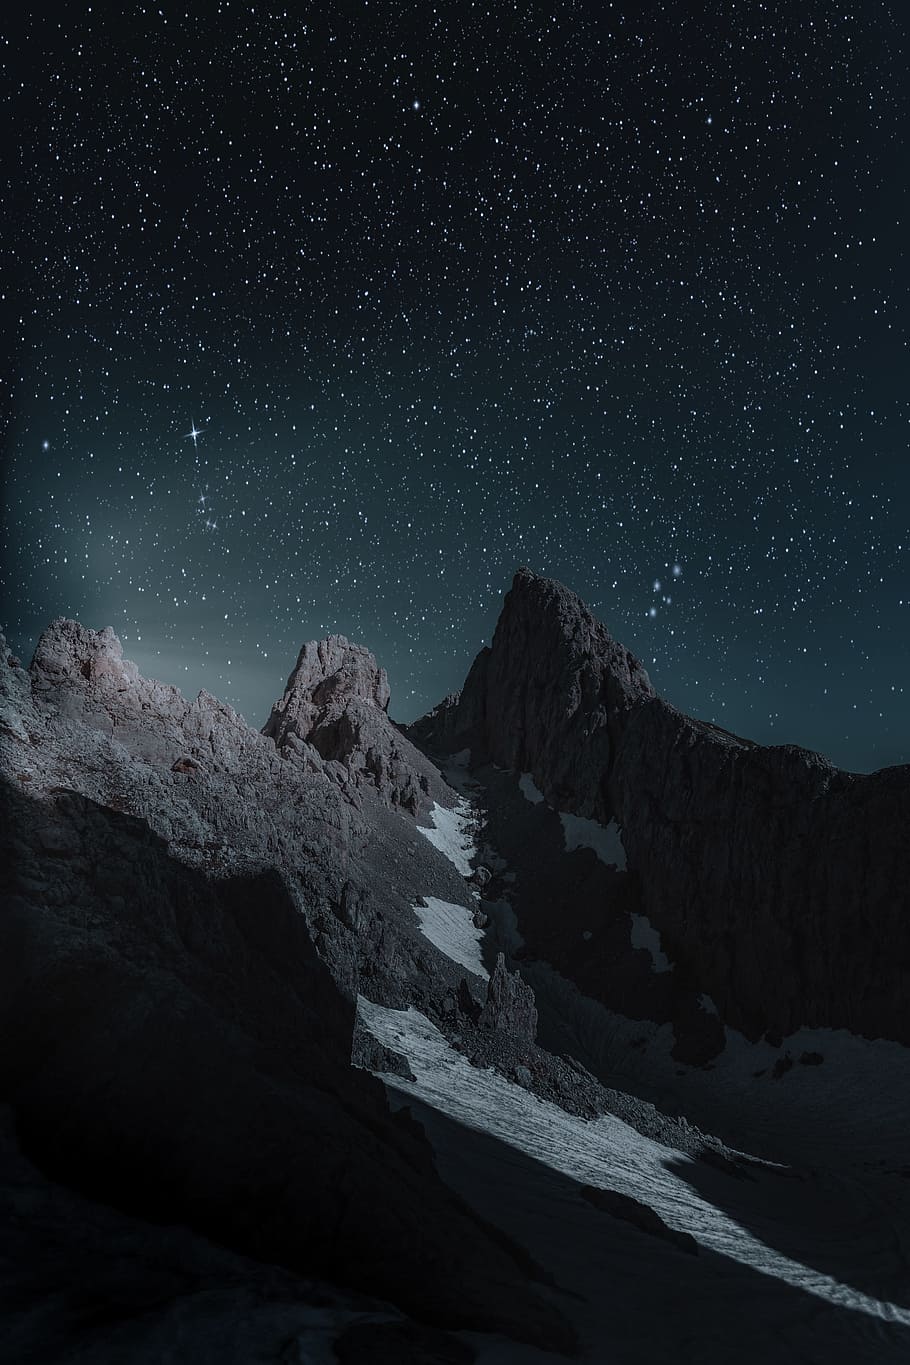 brown mountain at nighttime, moon, starry sky, astrophotography